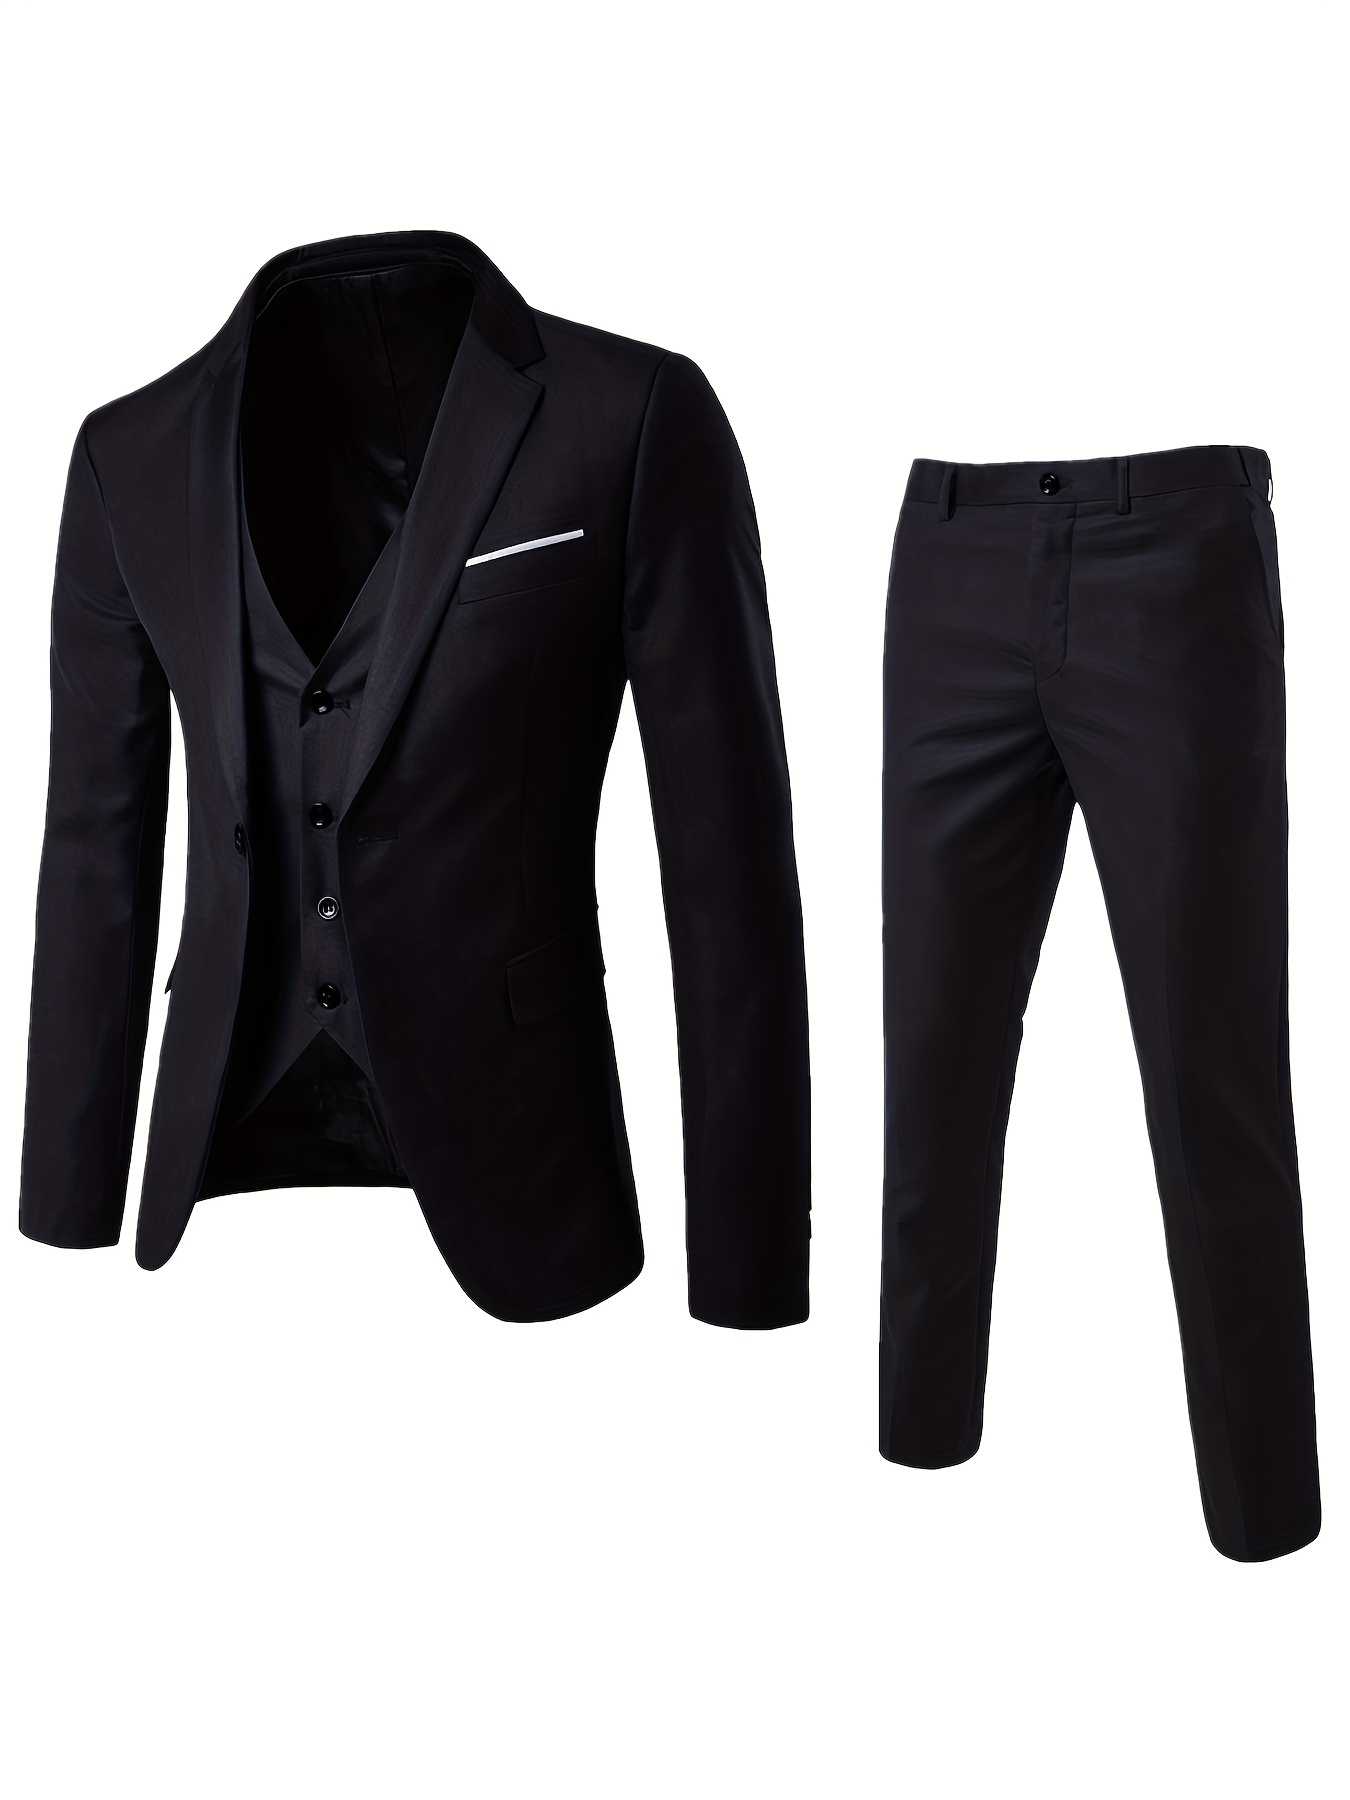 Blazers for Men (ब्लेजर) - Upto 50% to 80% OFF on Mens Blazers Online at  Best Prices in India | Flipkart.com